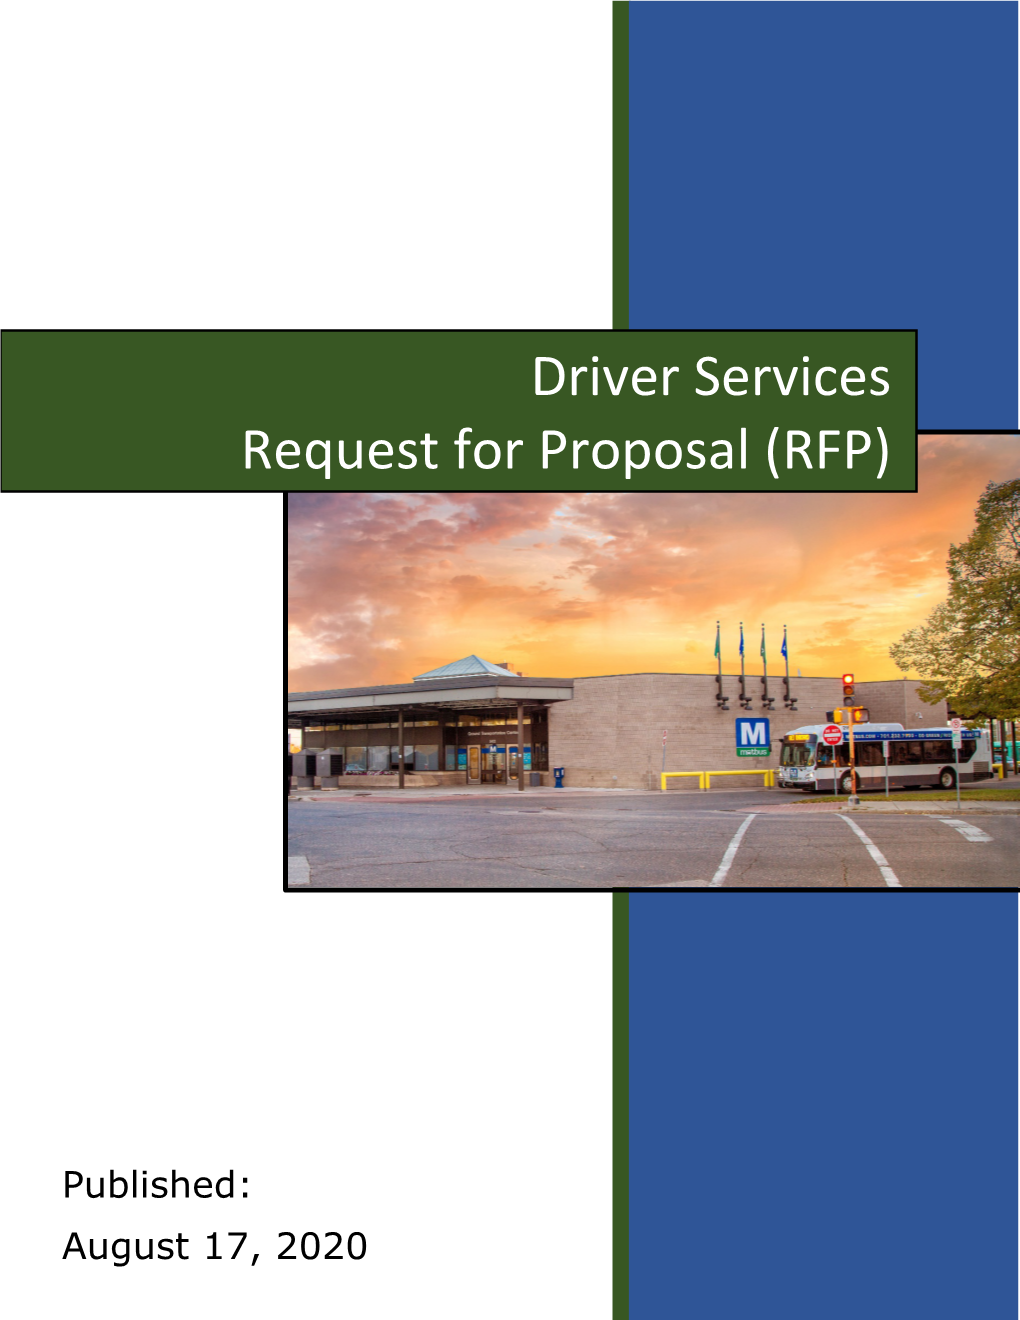 Driver Services Request for Proposal (RFP)